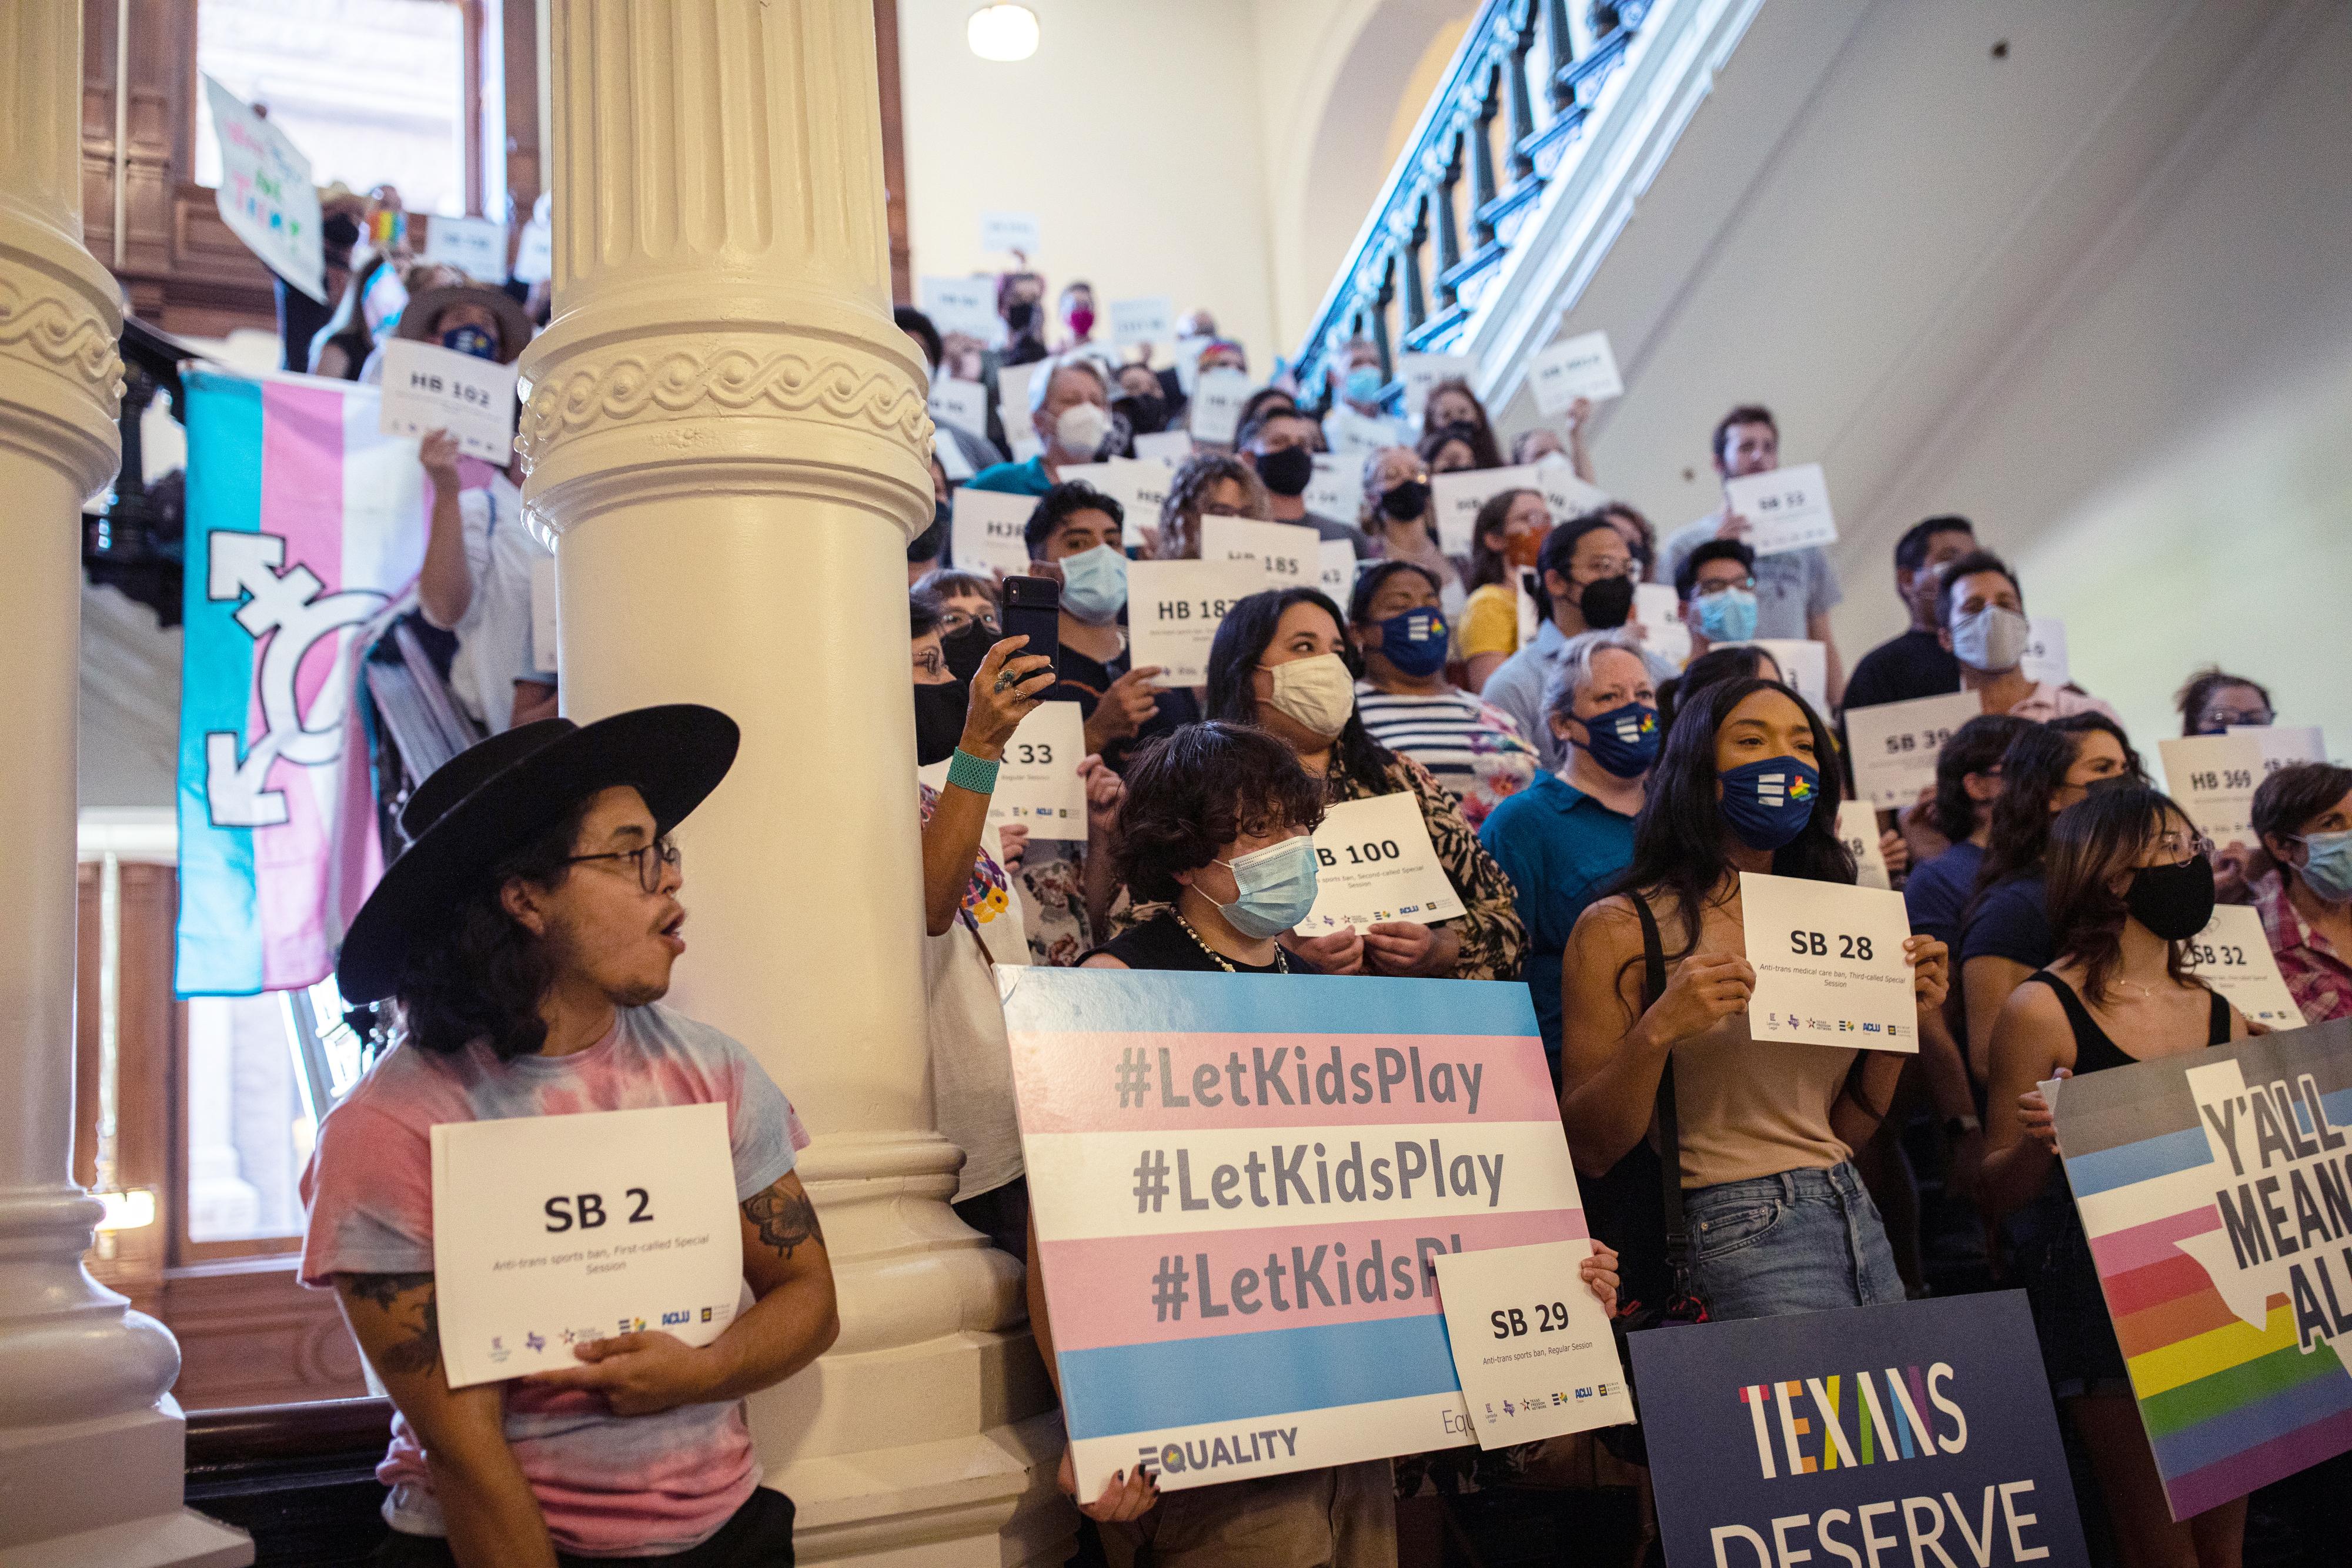 LGBTQ advocates stand on steps holding signs in support of LGBTQ rights.